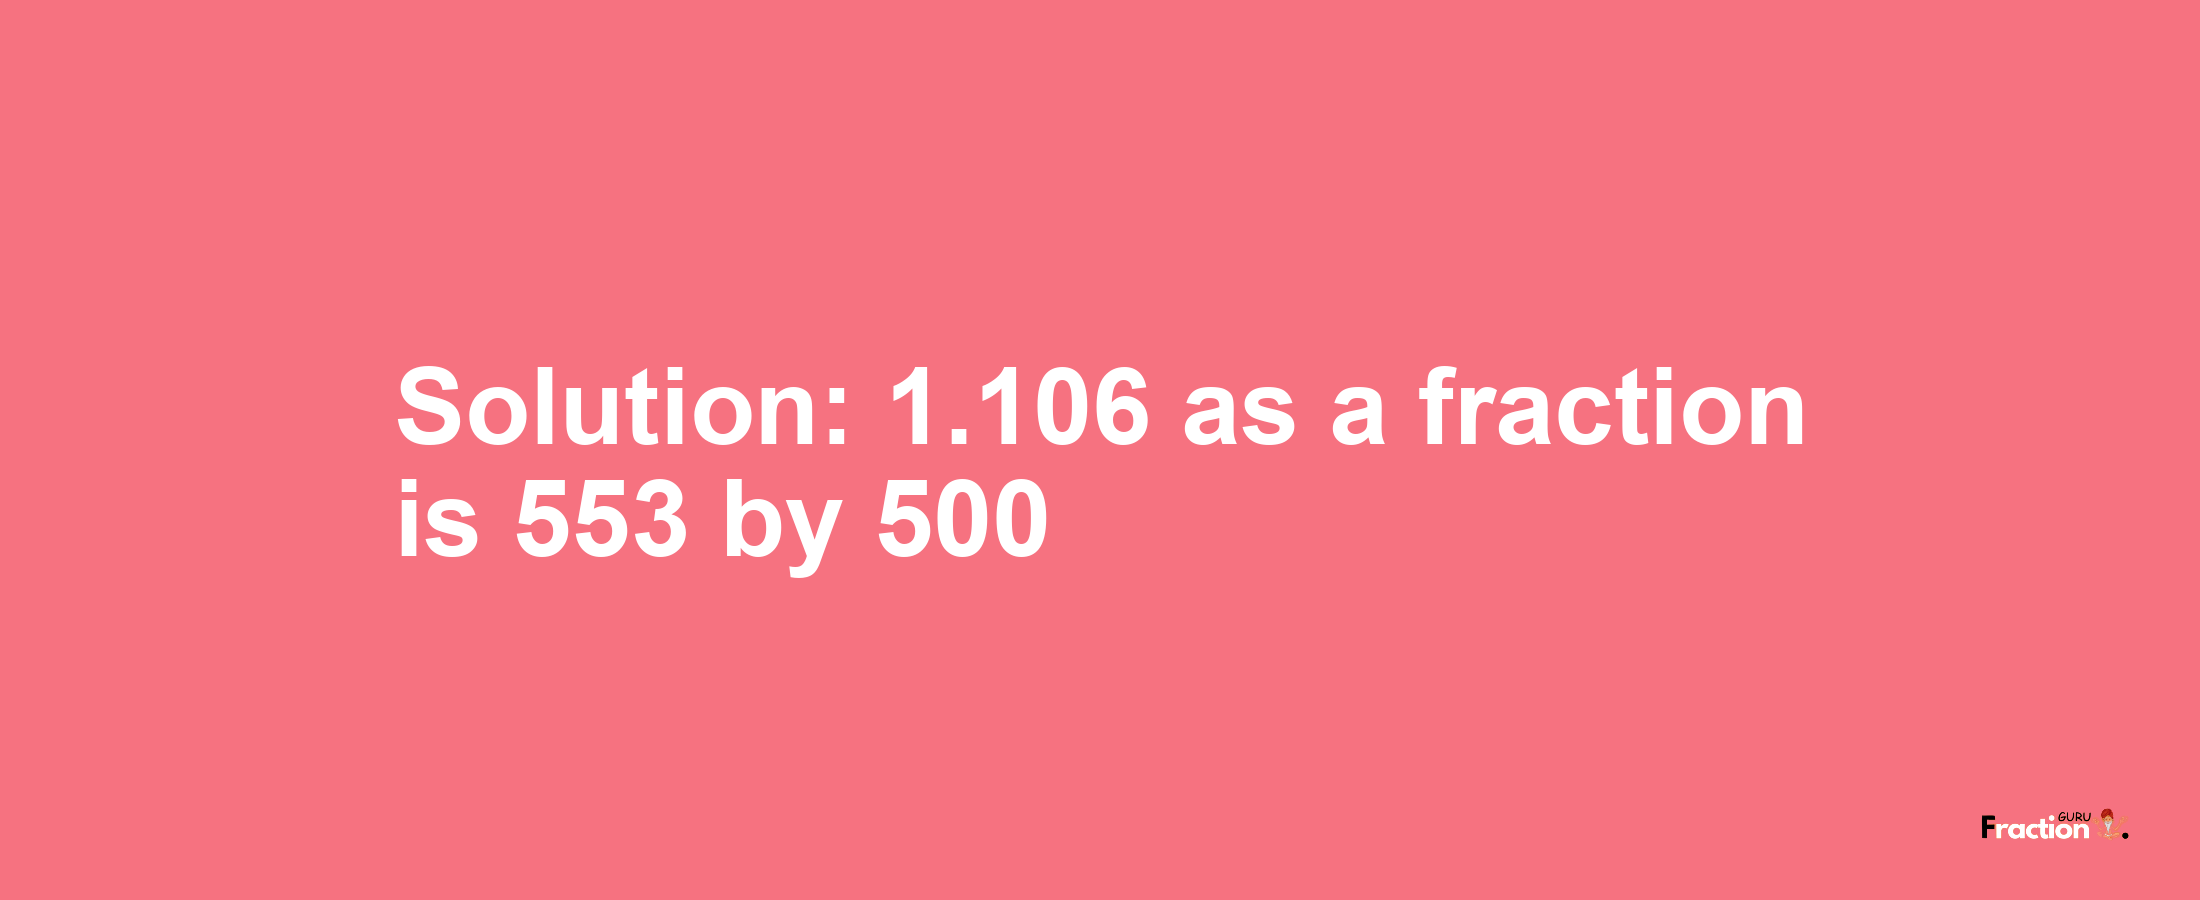 Solution:1.106 as a fraction is 553/500